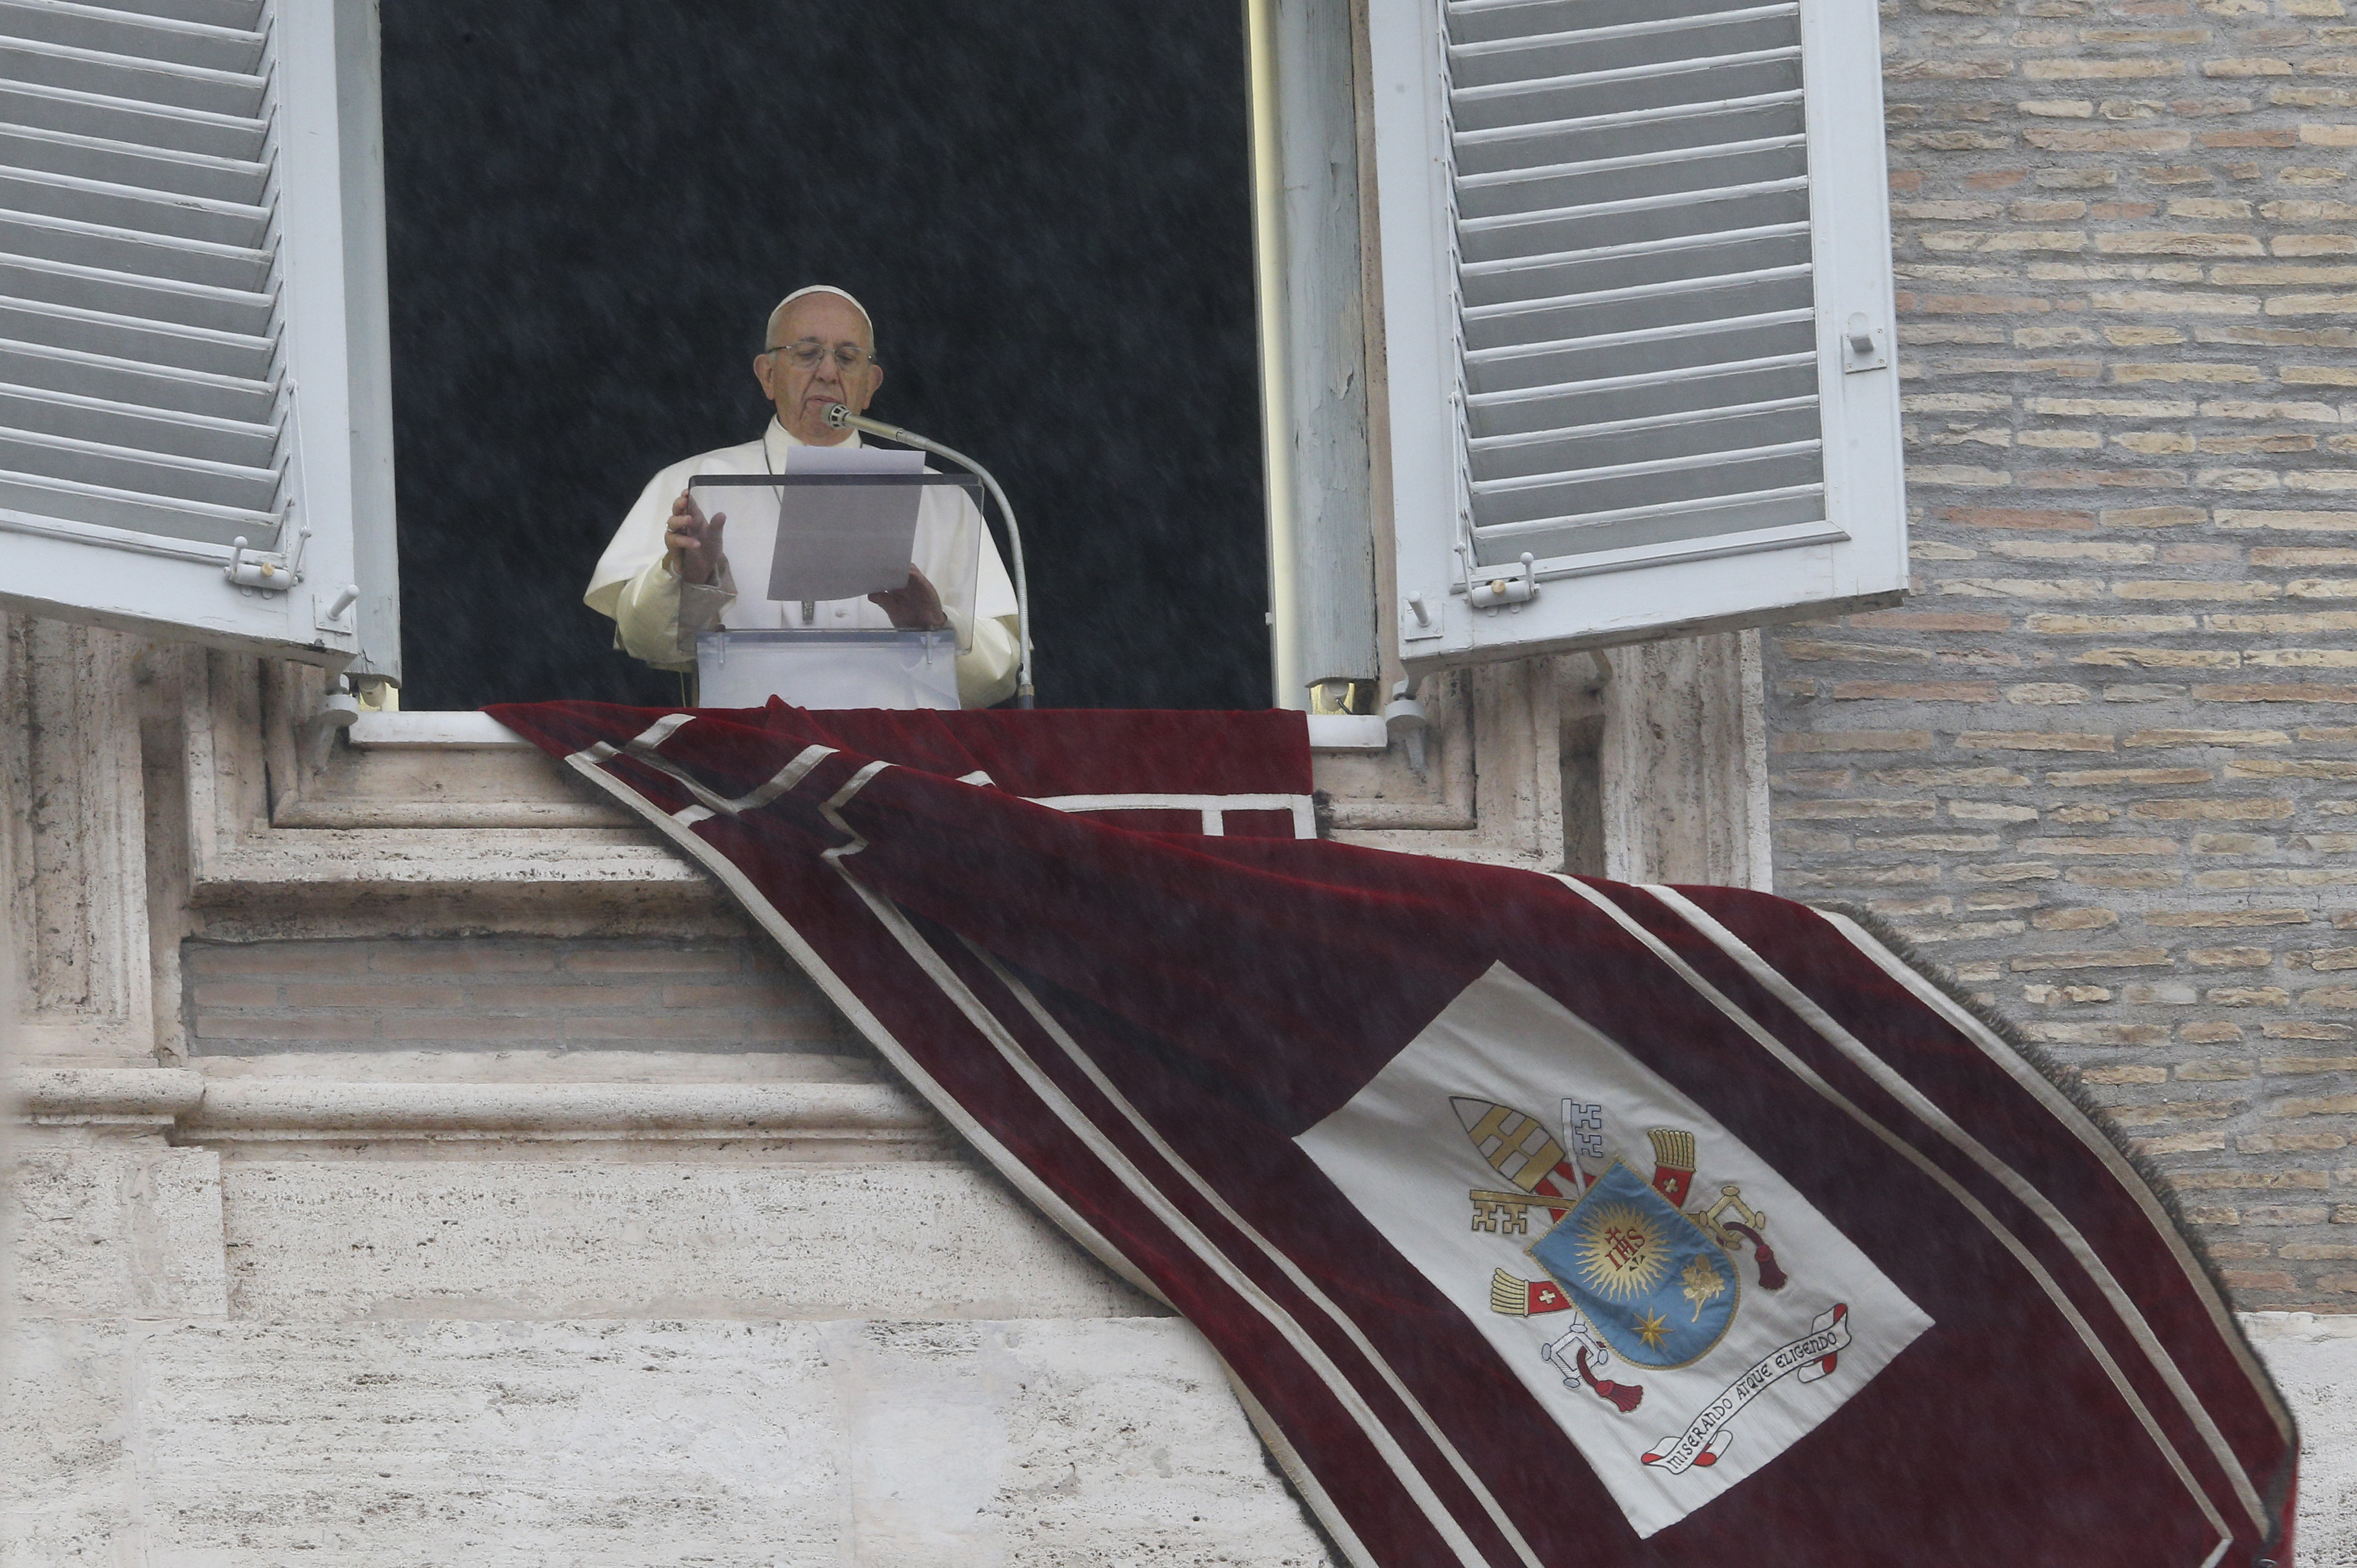 People must choose: holiness or nothing, says pope